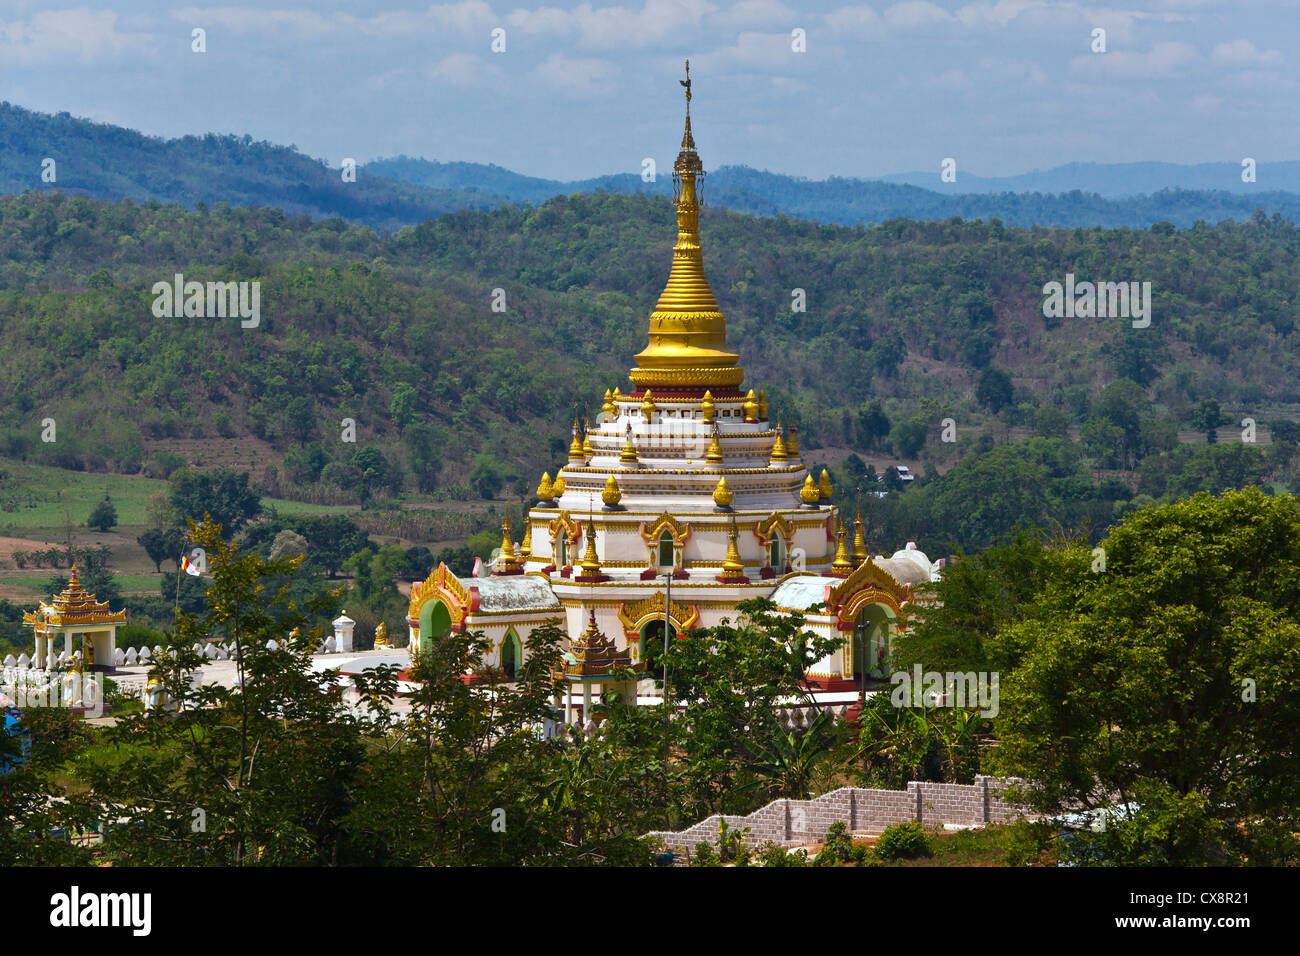 A BUDDHIST MONASTERY in the country side near HSIPAW - MYANMAR Stock Photo